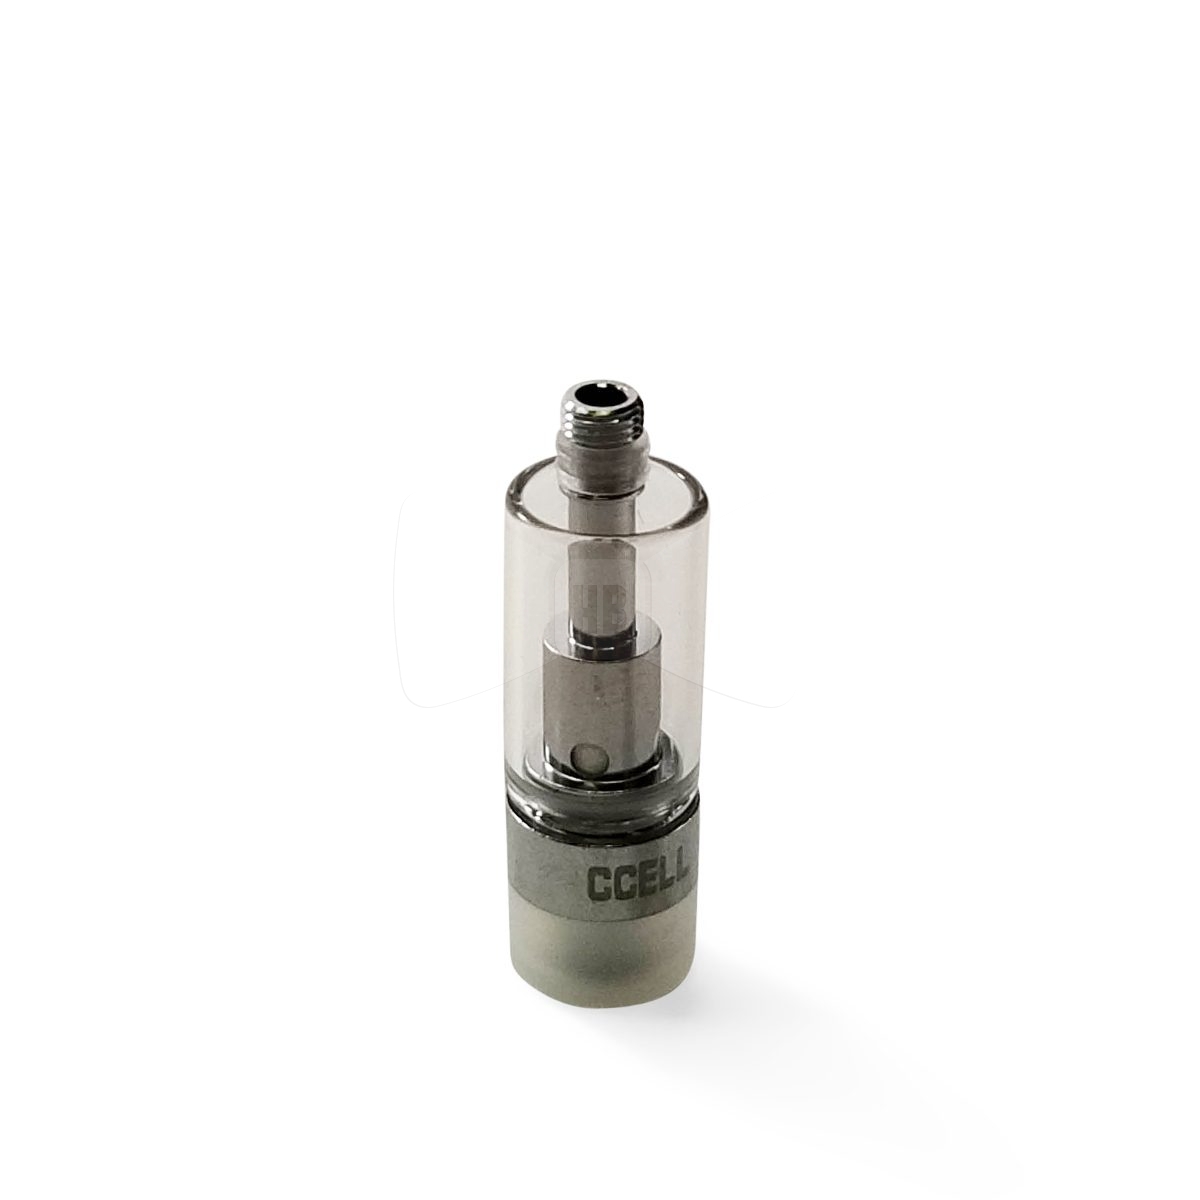 CCell Threaded Glass Cartridge Silver .5ML